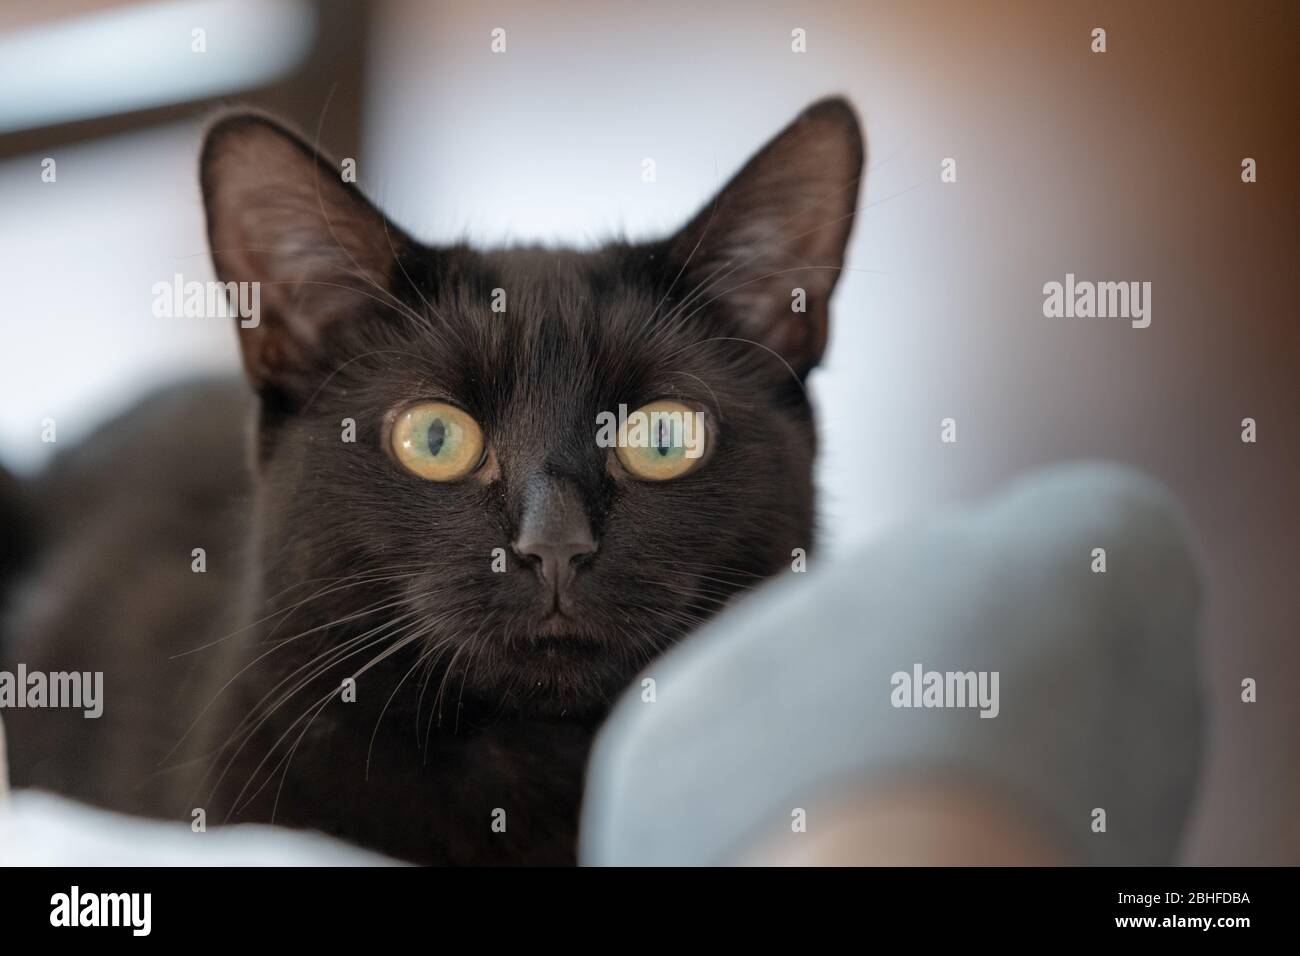 Beautiful black cat looking directly at the camera in a well lit bright room Stock Photo